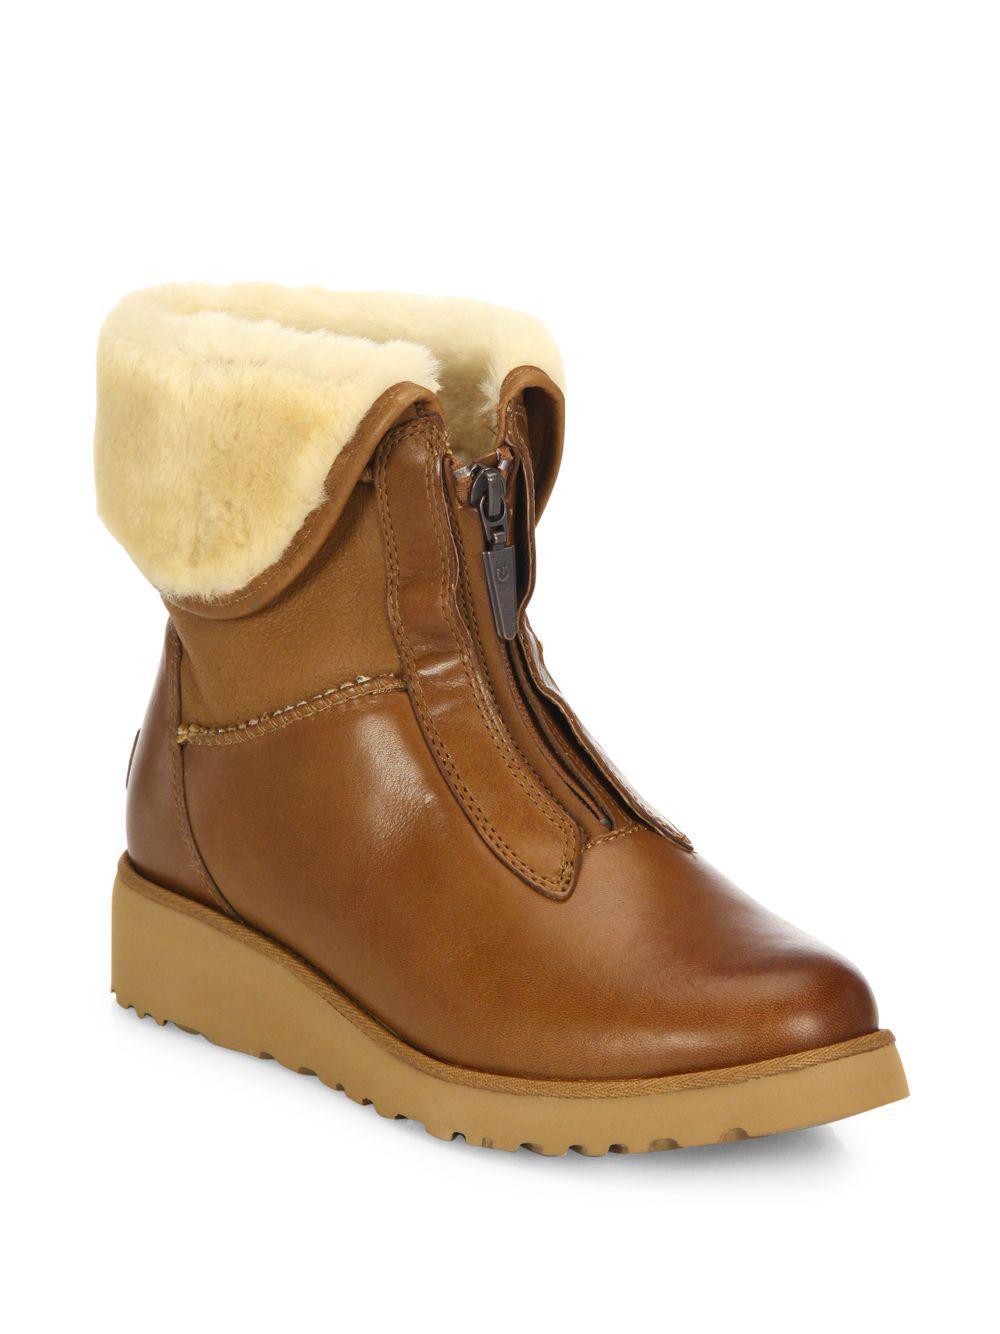 brown leather uggs with zipper